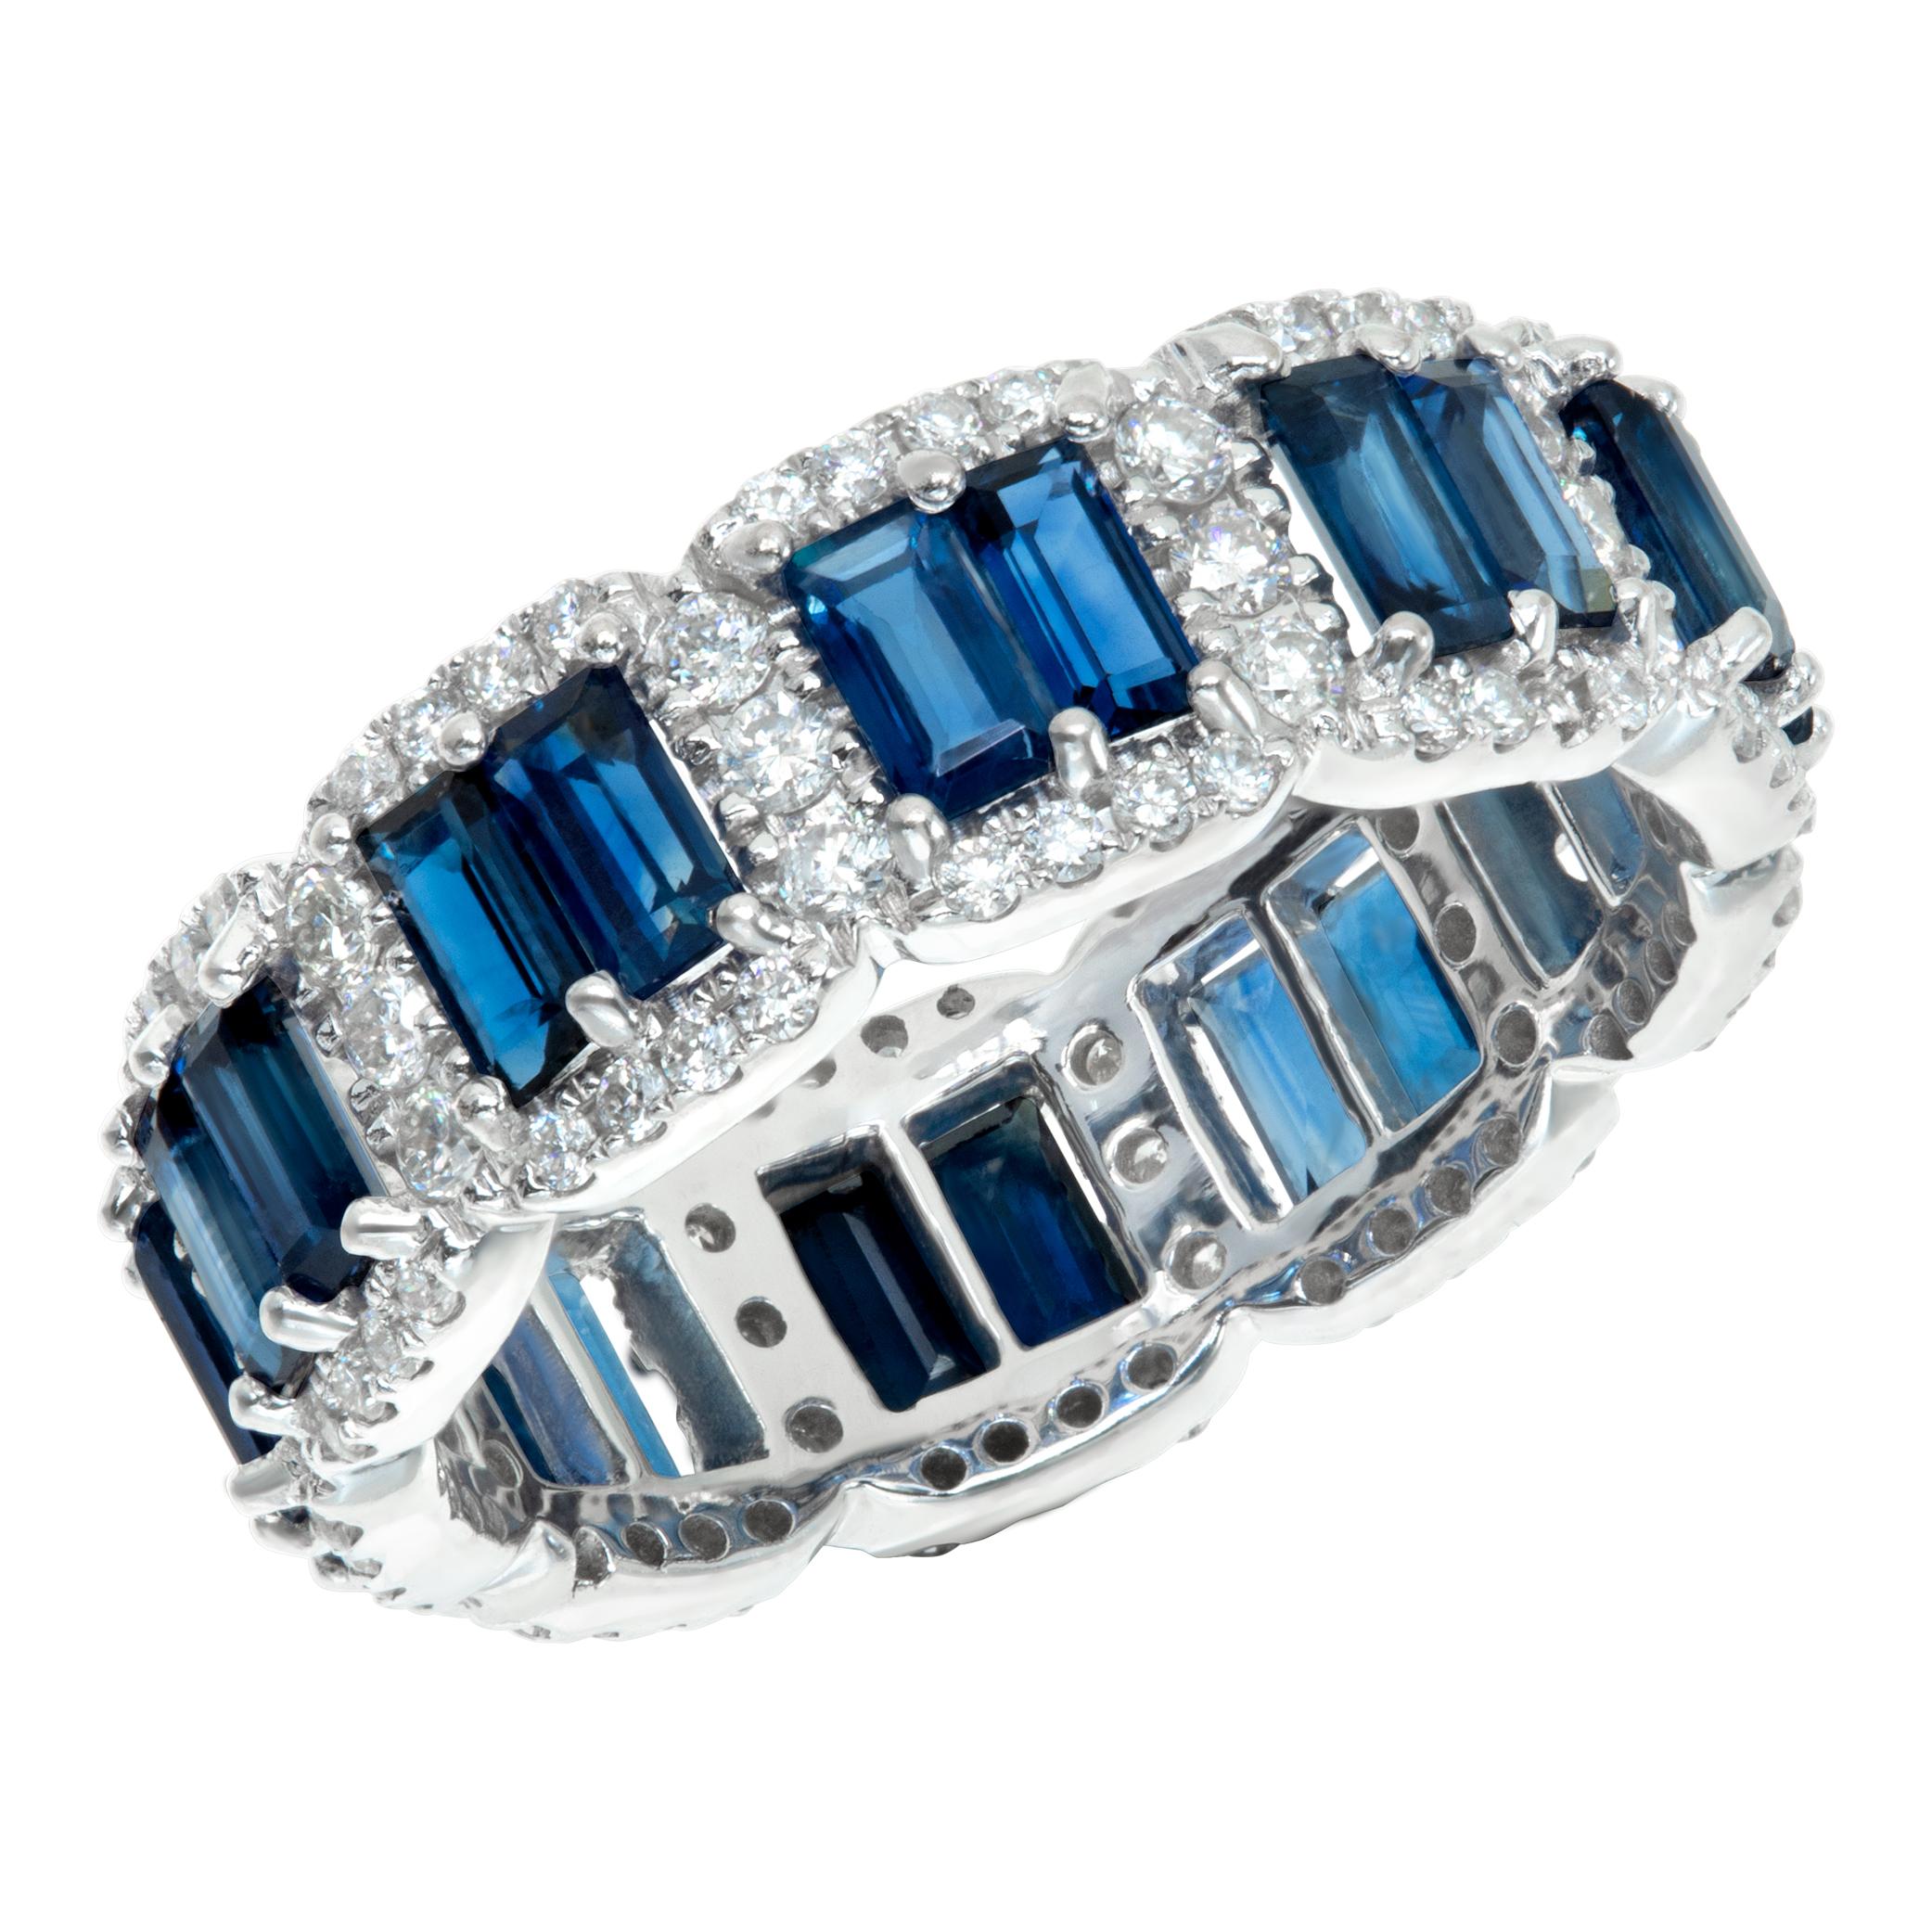 White gold diamond and sapphire eternity band In Excellent Condition For Sale In Surfside, FL